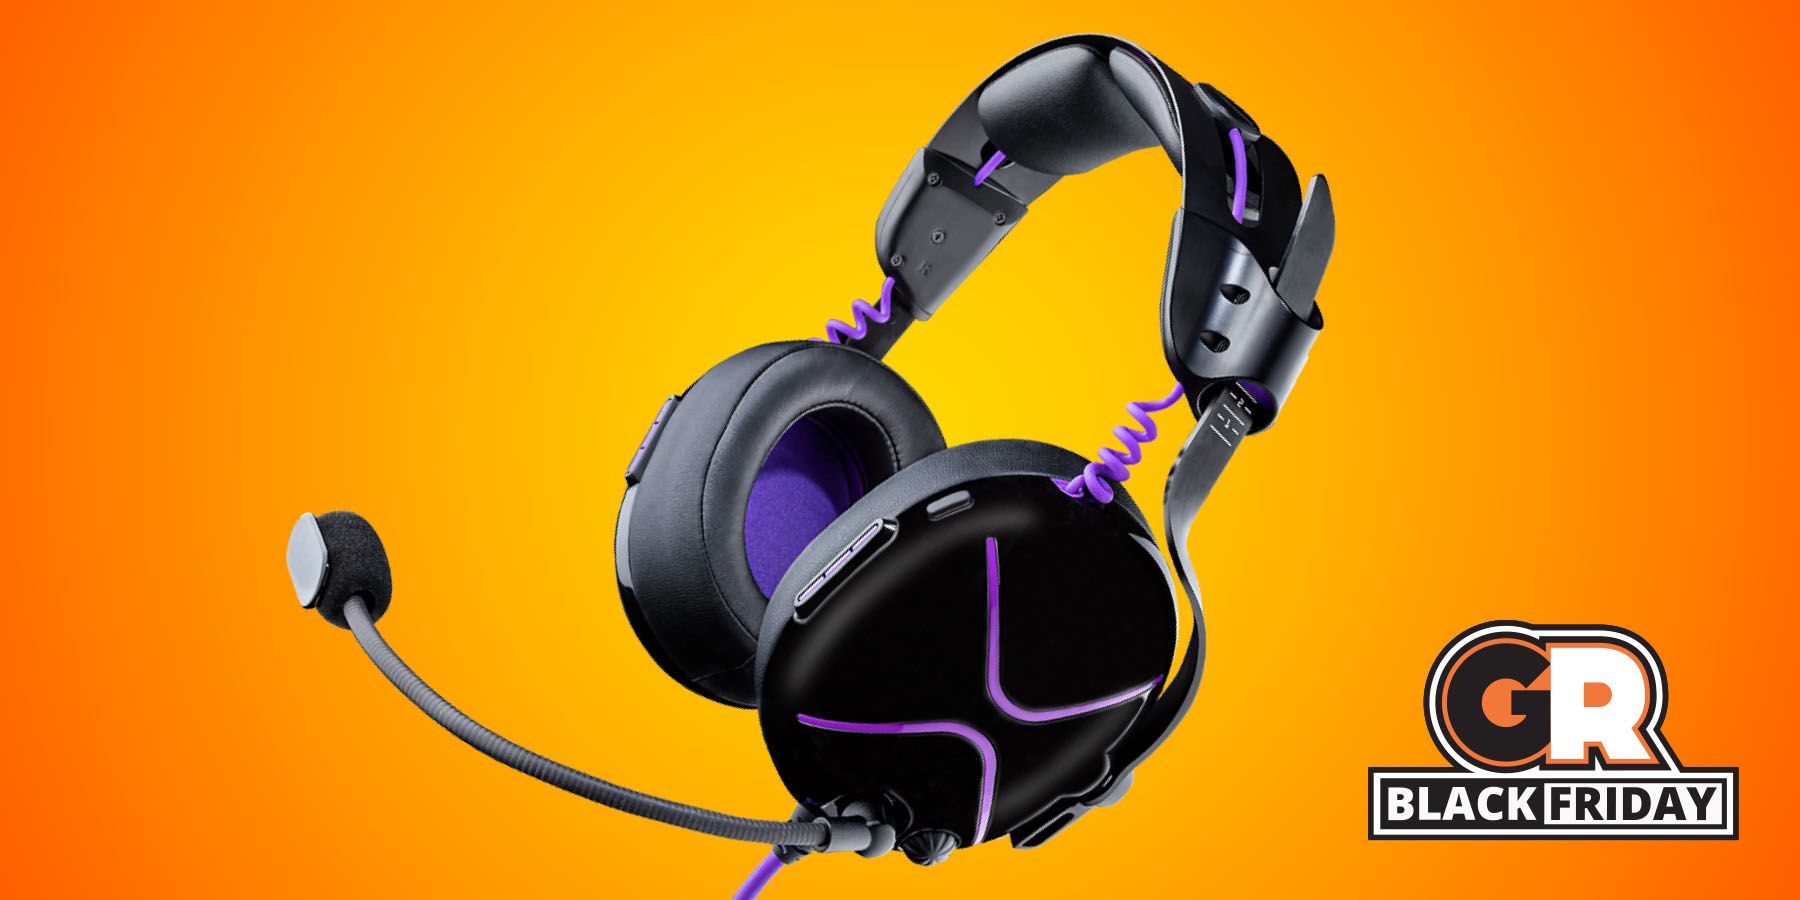 victrix pro af wired professional esports gaming headset gamerant amazon black friday deals feature 1